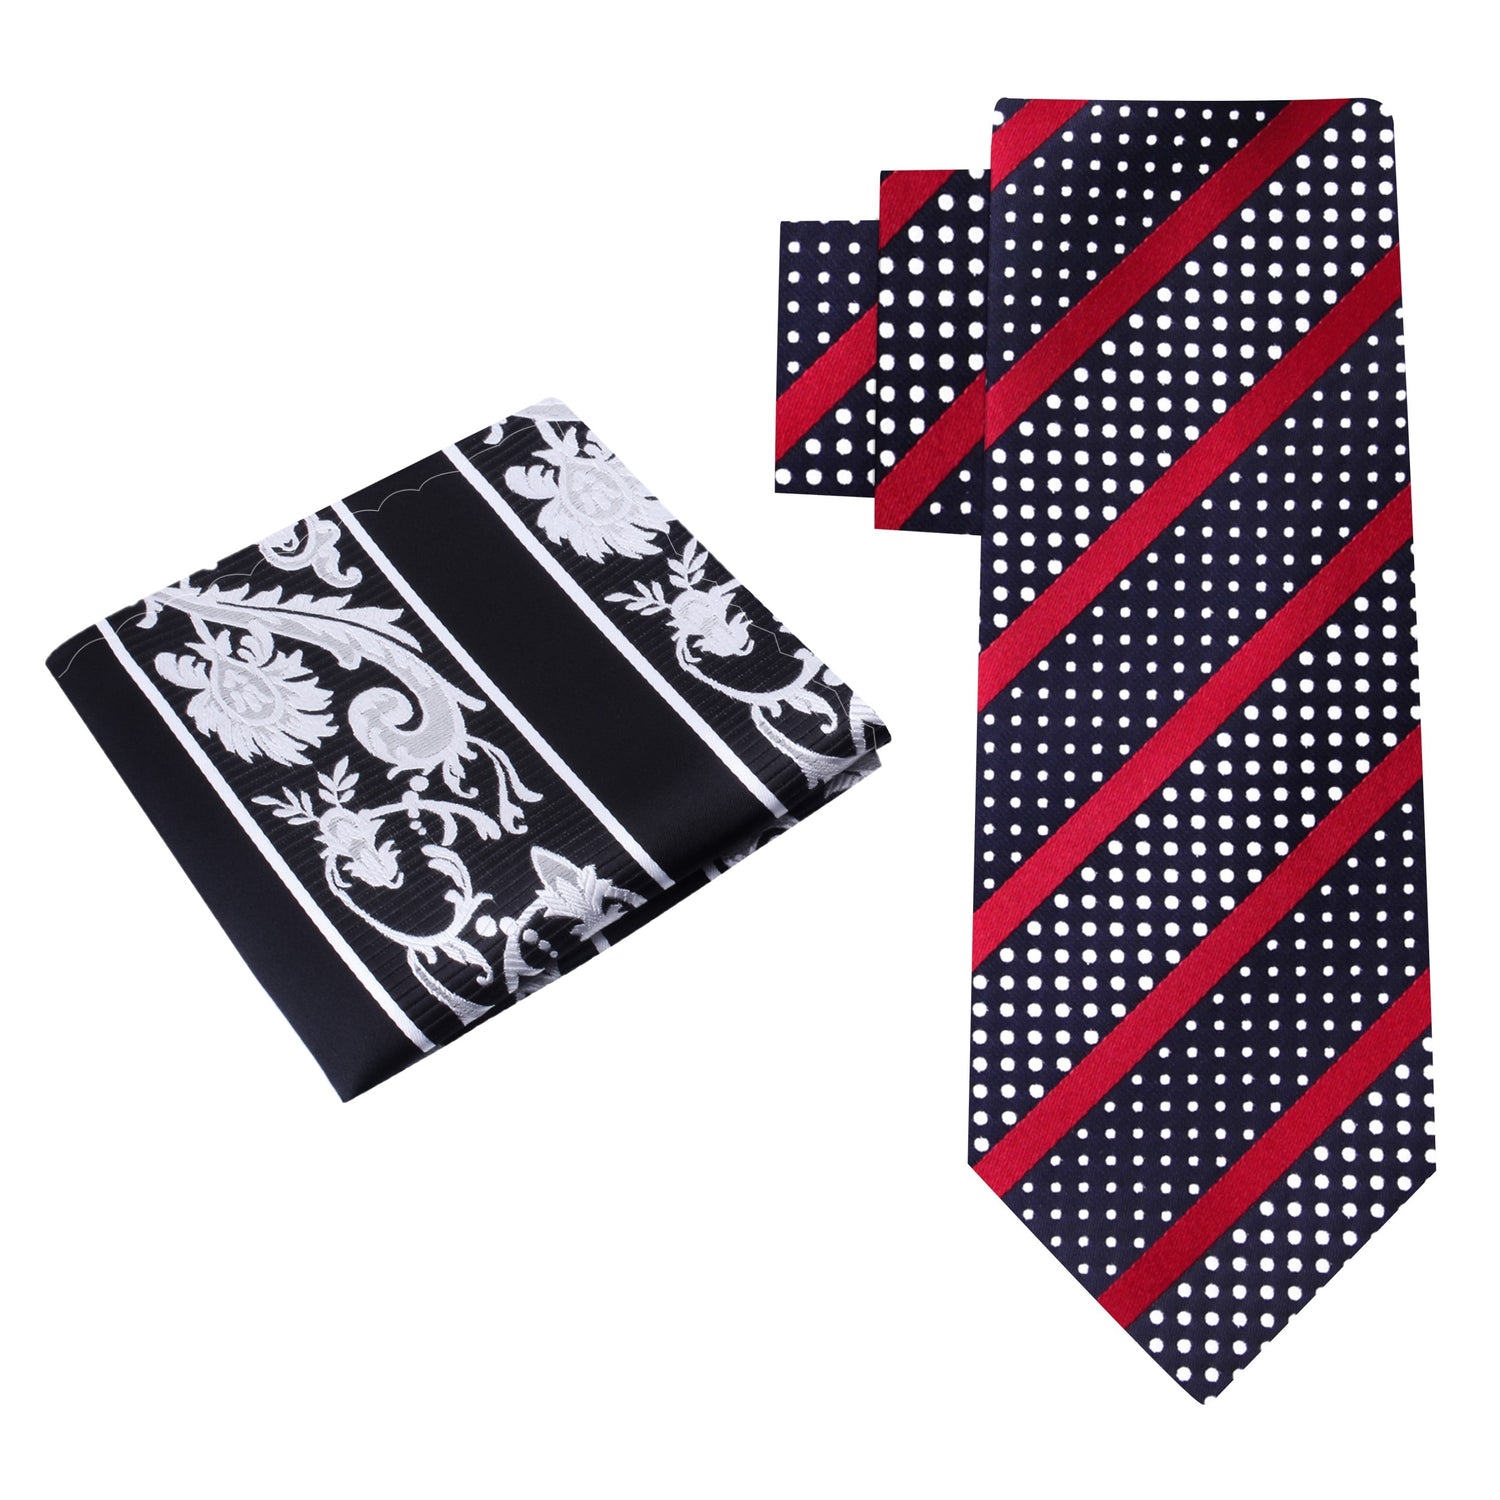 Alt view: Black, Red, White with Stripes and Dots Tie Tie with Accenting Black, Grey Paisley Square